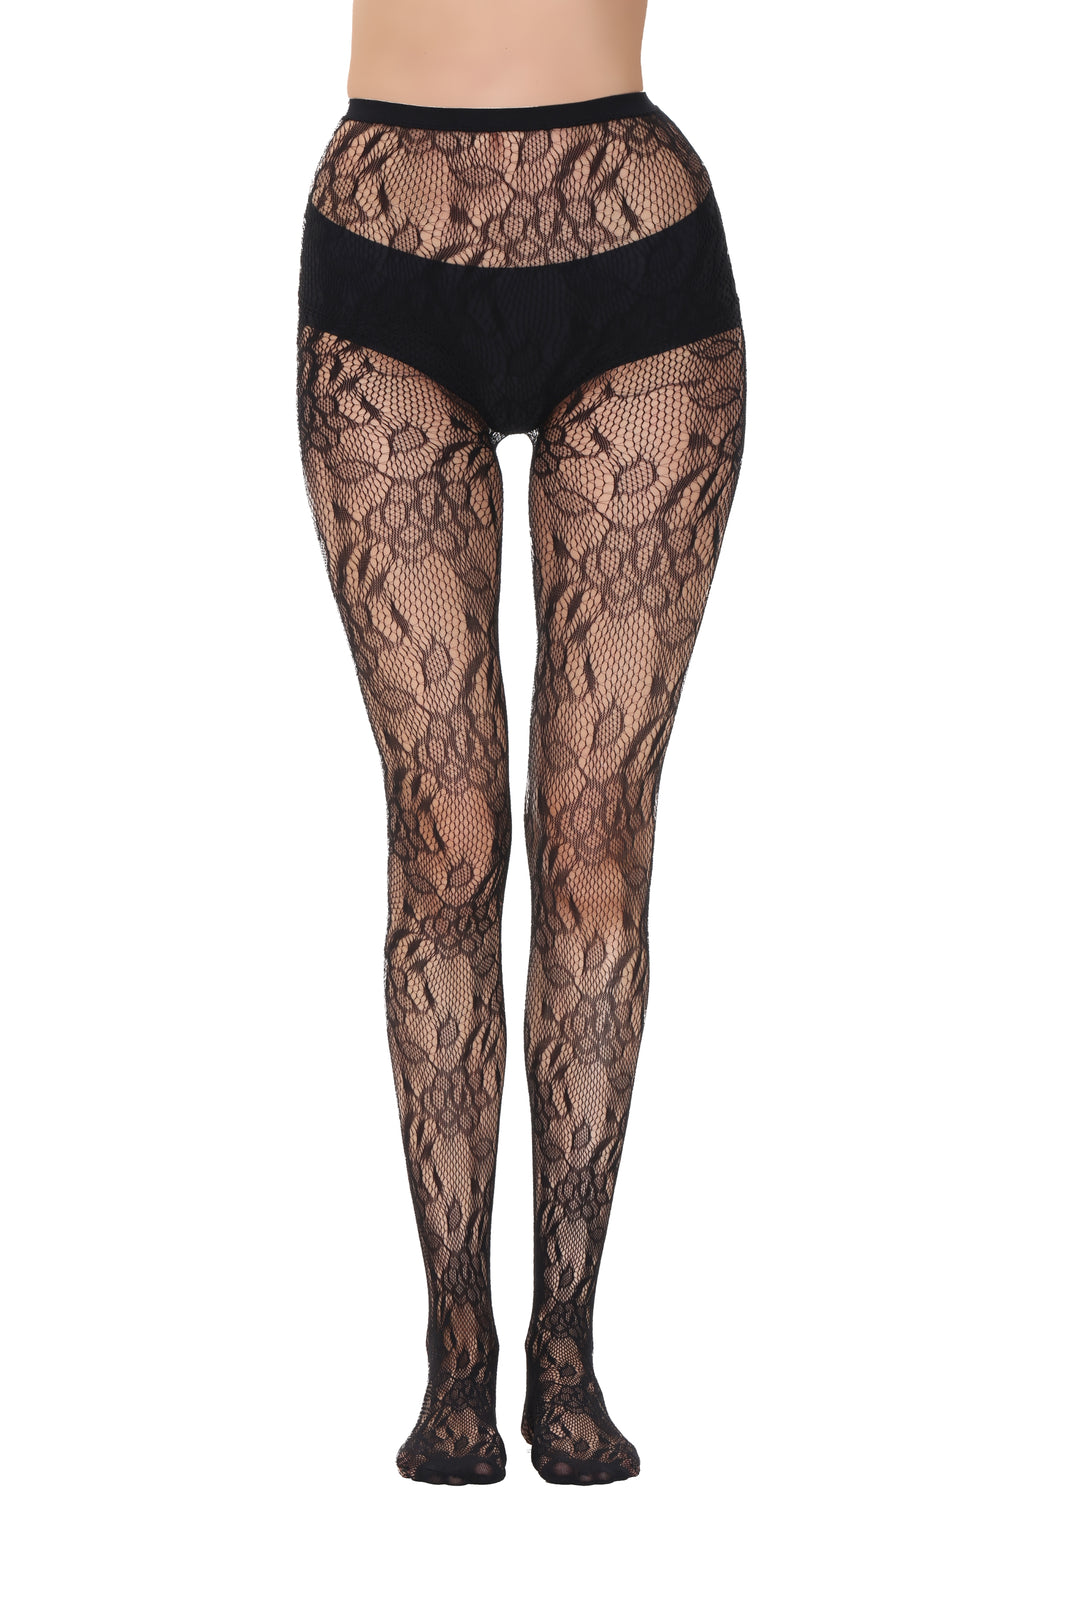 Fishnet Tights 110963 Front